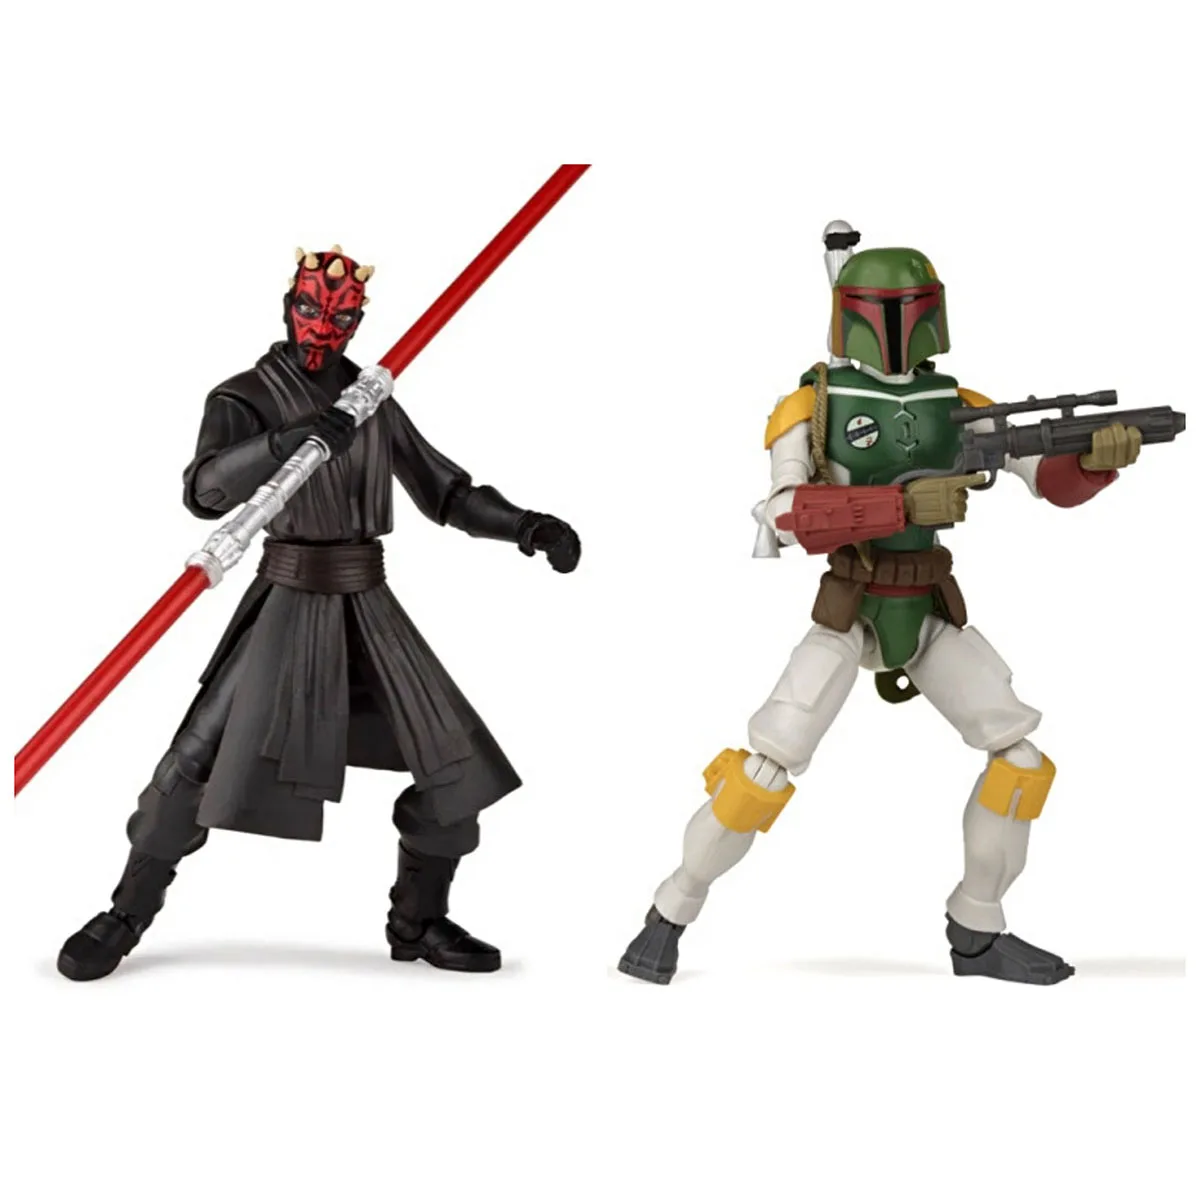 

Star Wars Galaxy of Adventures Darth Maul Boba Fett Joints Movable 5-inches Action Figure Model Ornaments Toys Children Gifts